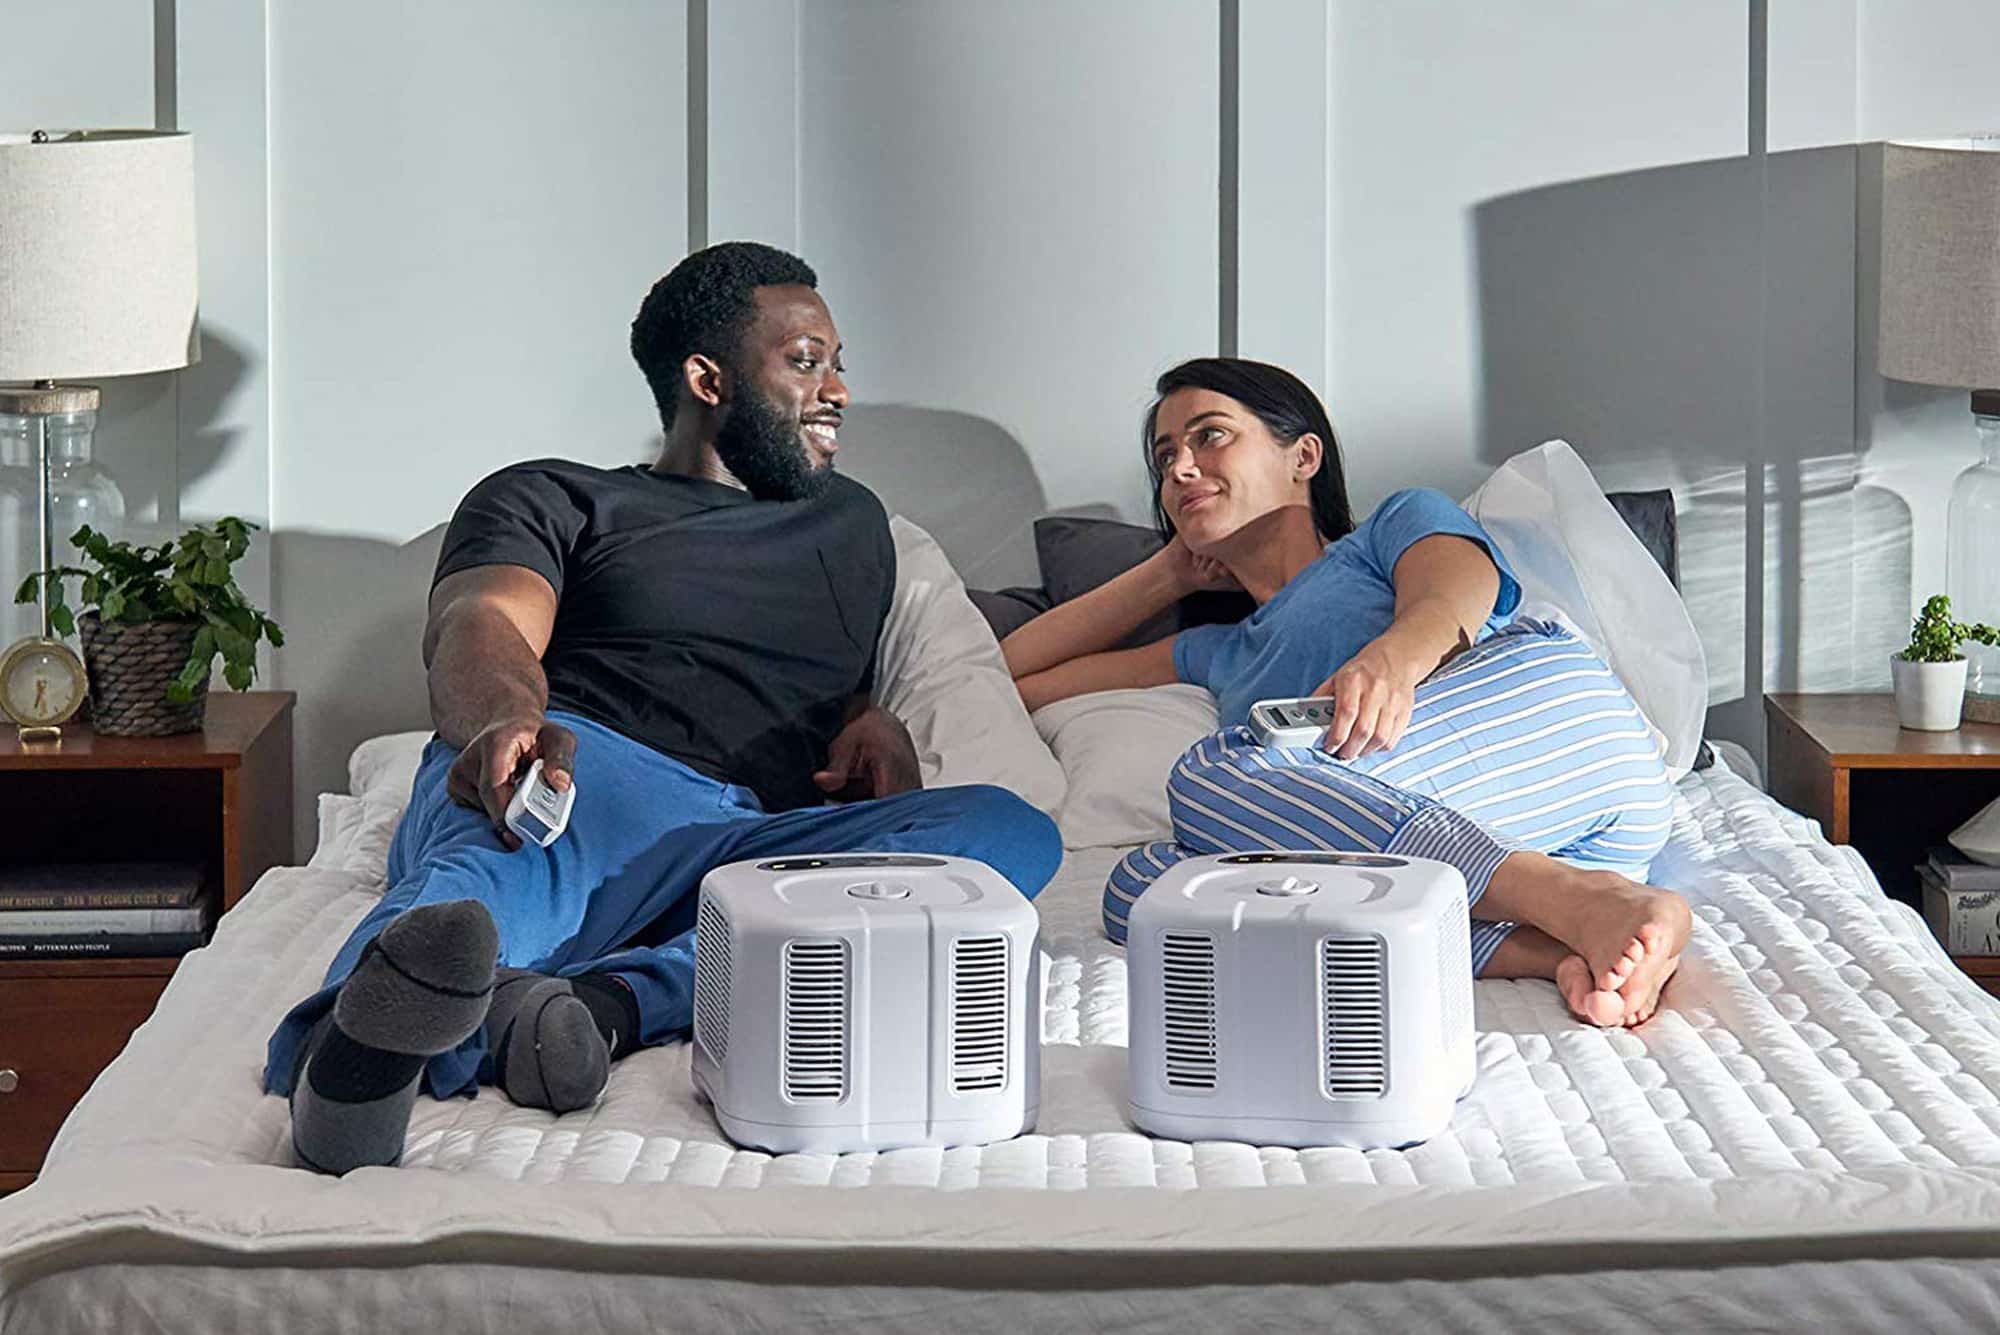 ben greenfield chilipad discount - 2022 ChiliPad Cube & Mattress Pad Review + Coupon Code! + Coupon